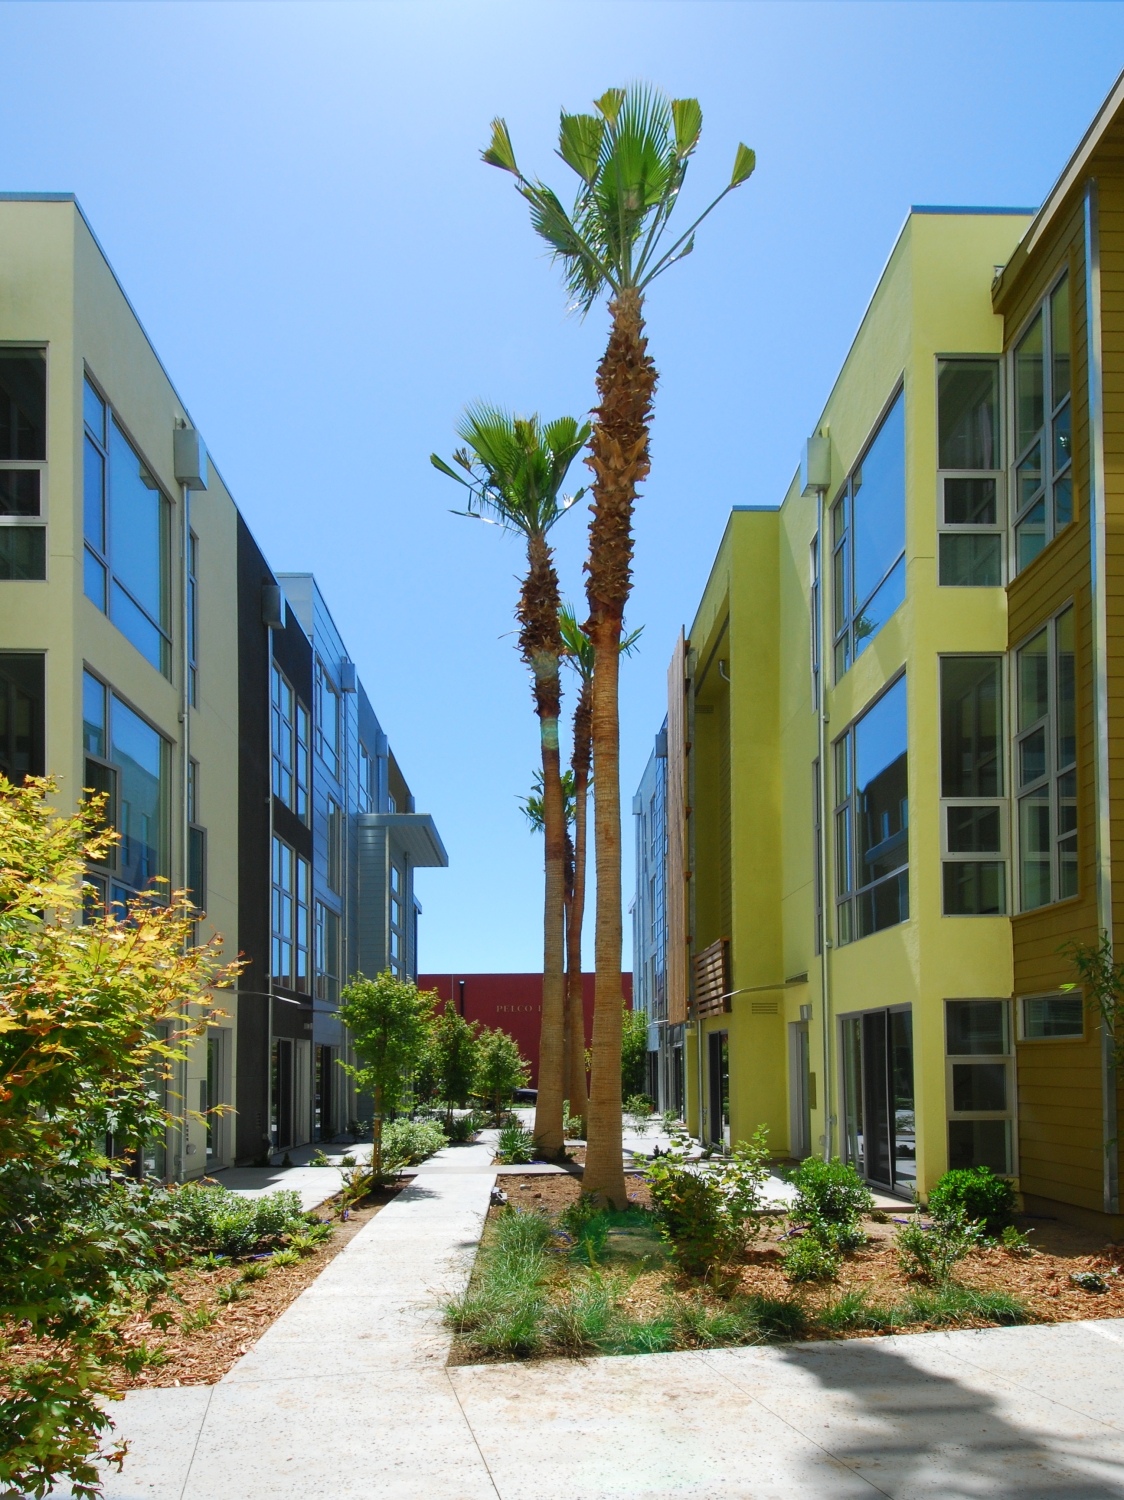 View of the courtyard and townhouses at Blue Star Corner in Emeryville, Ca.